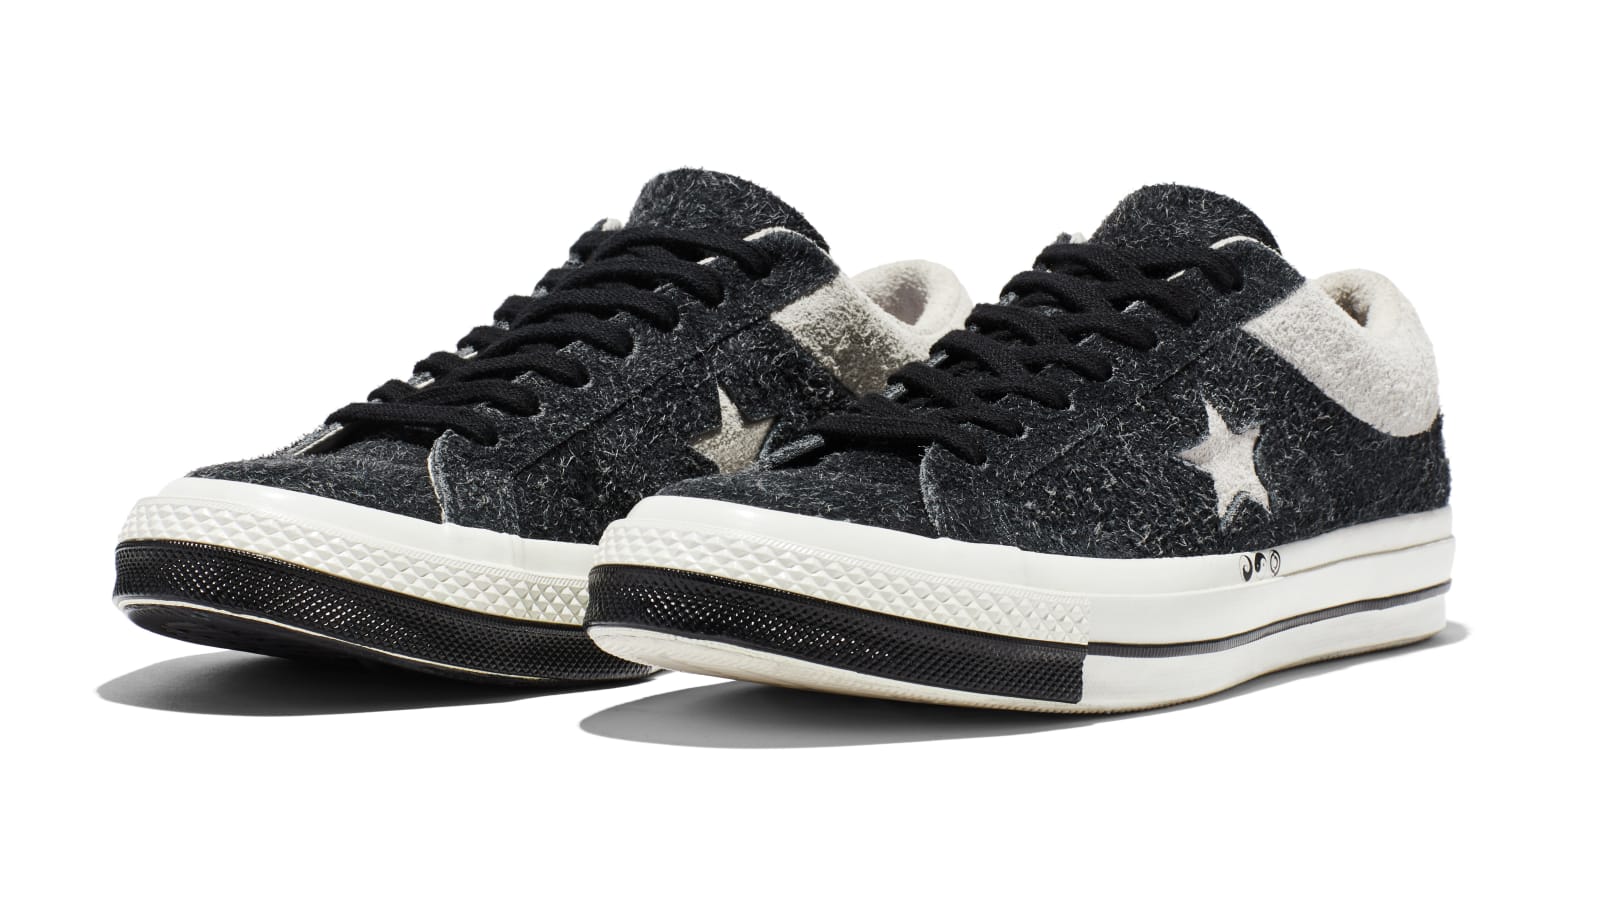 Clot x Converse One Star - Release Date Roundup: The Sneakers You Need to  Check Out this Weekend | Sole Collector